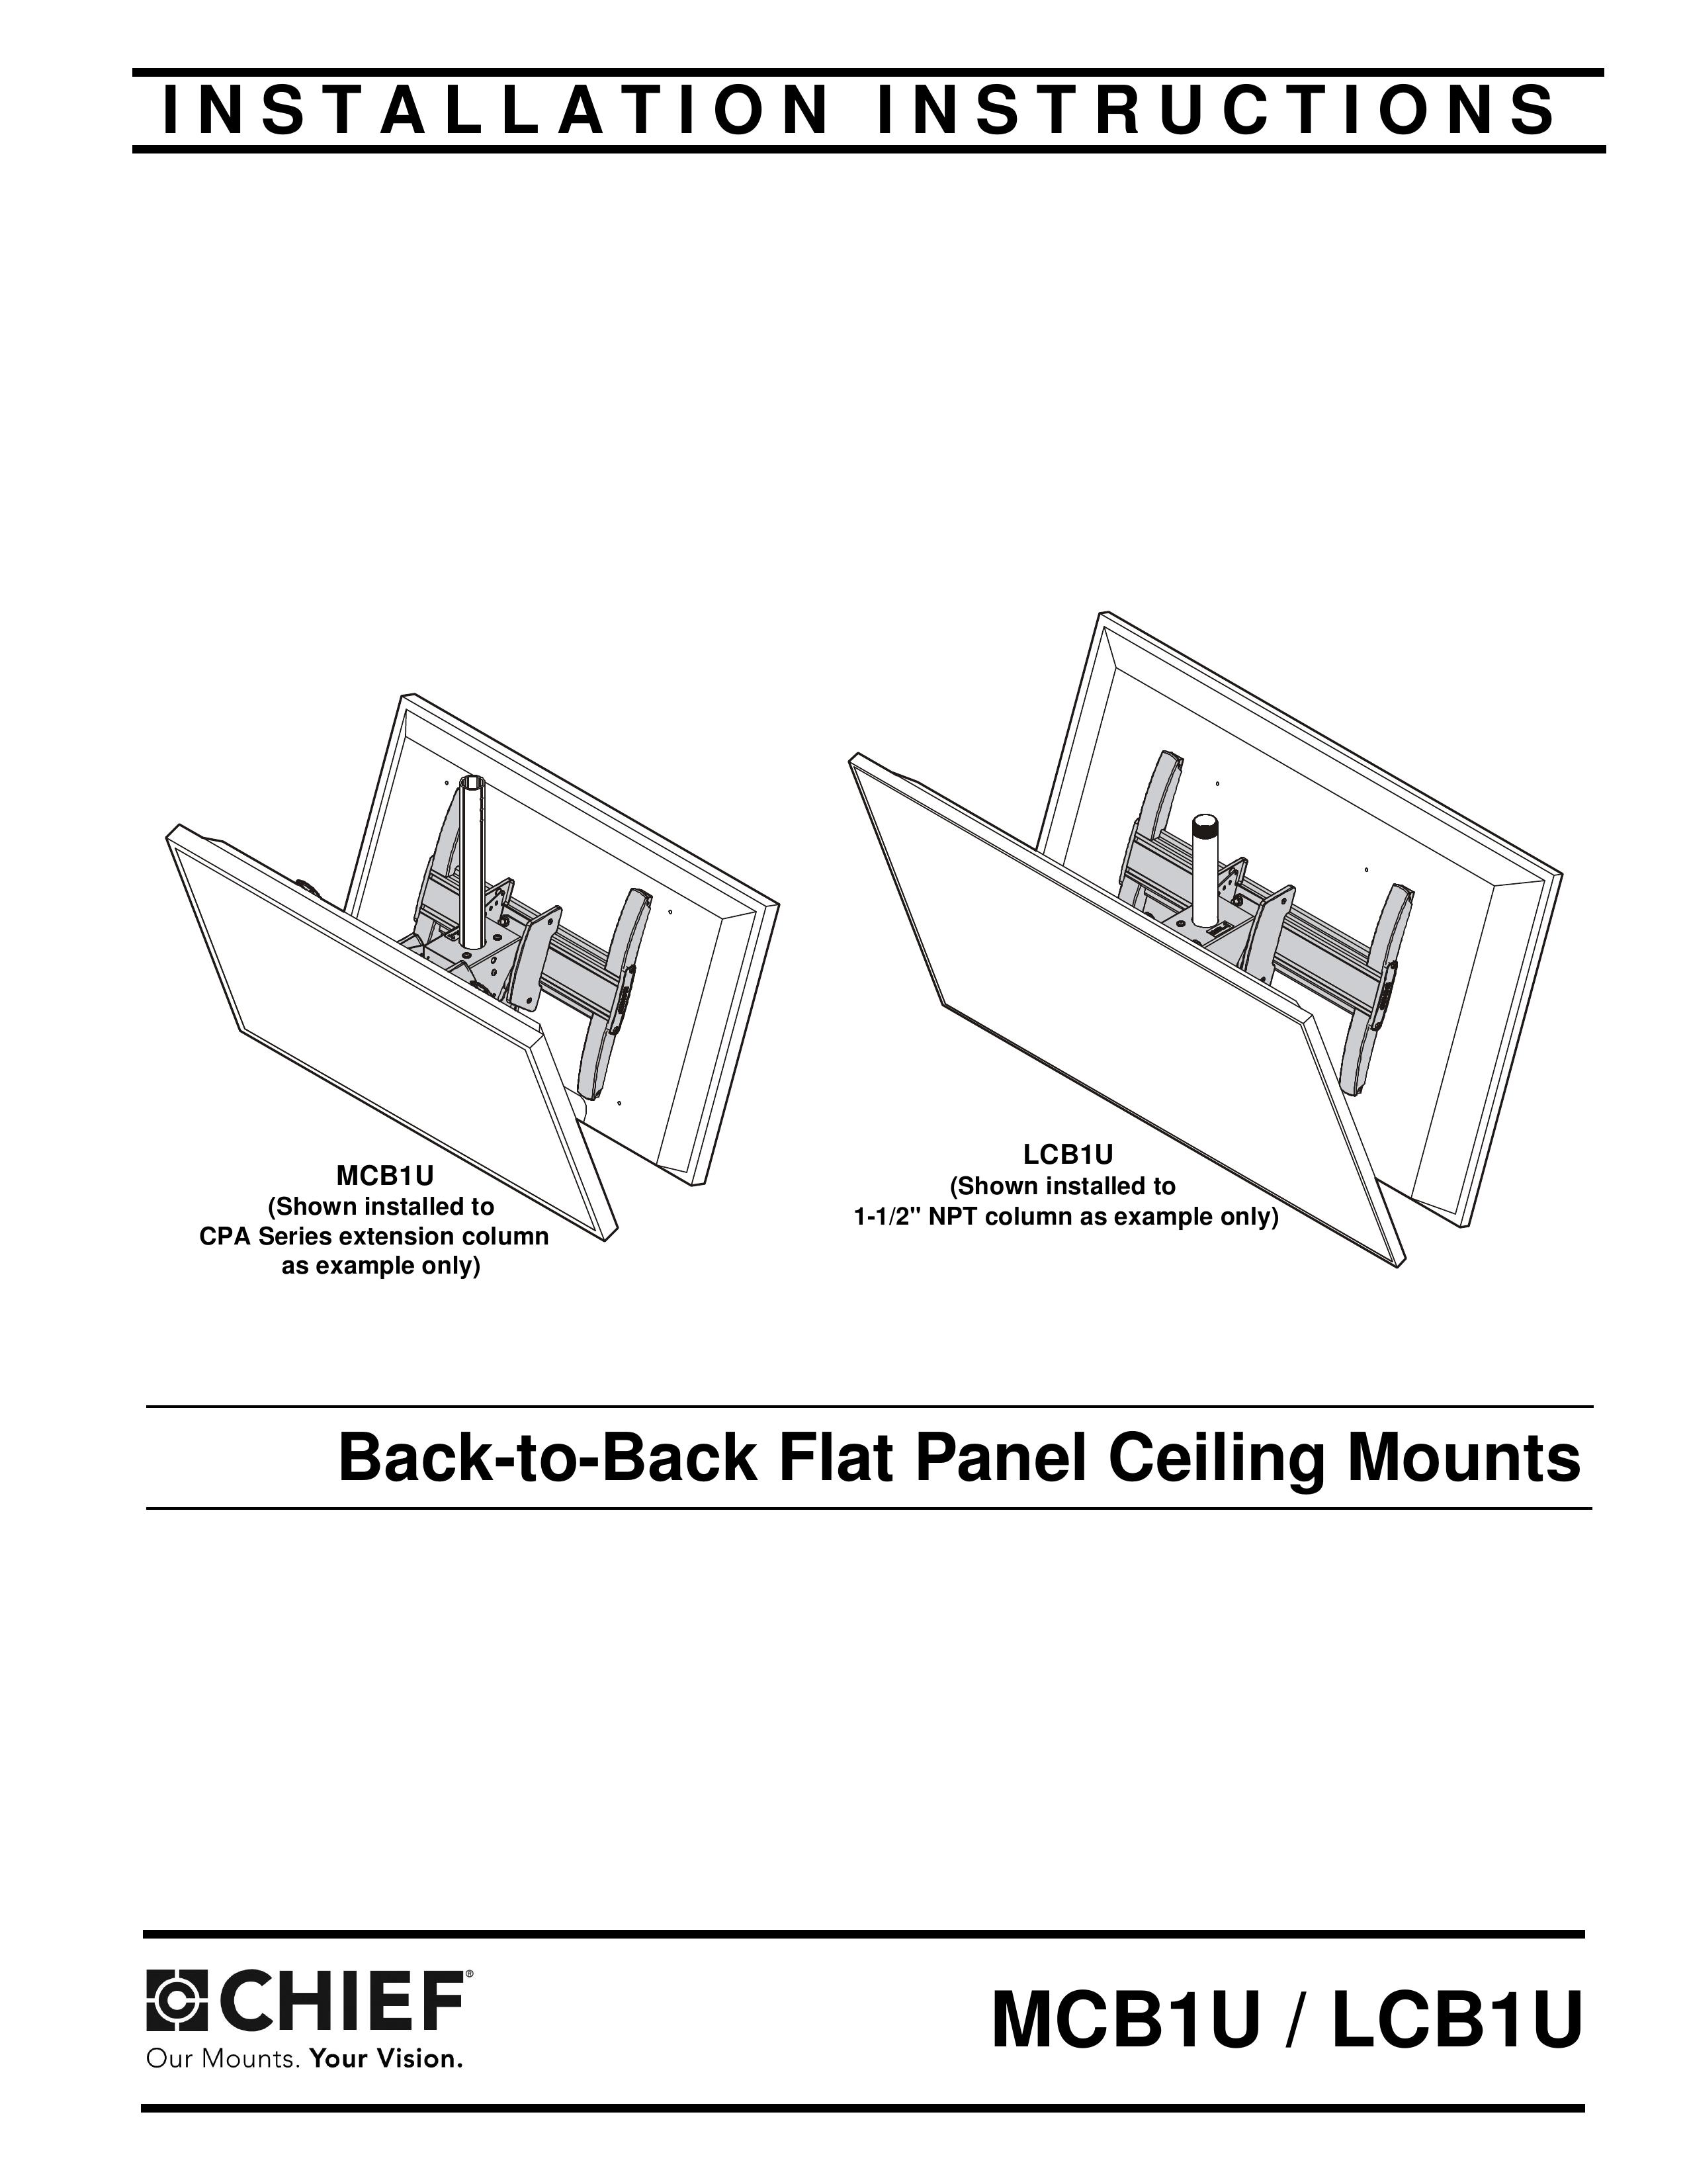 Chief Manufacturing chief back-to-back flat panel ceiling mounts Personal Lift User Manual